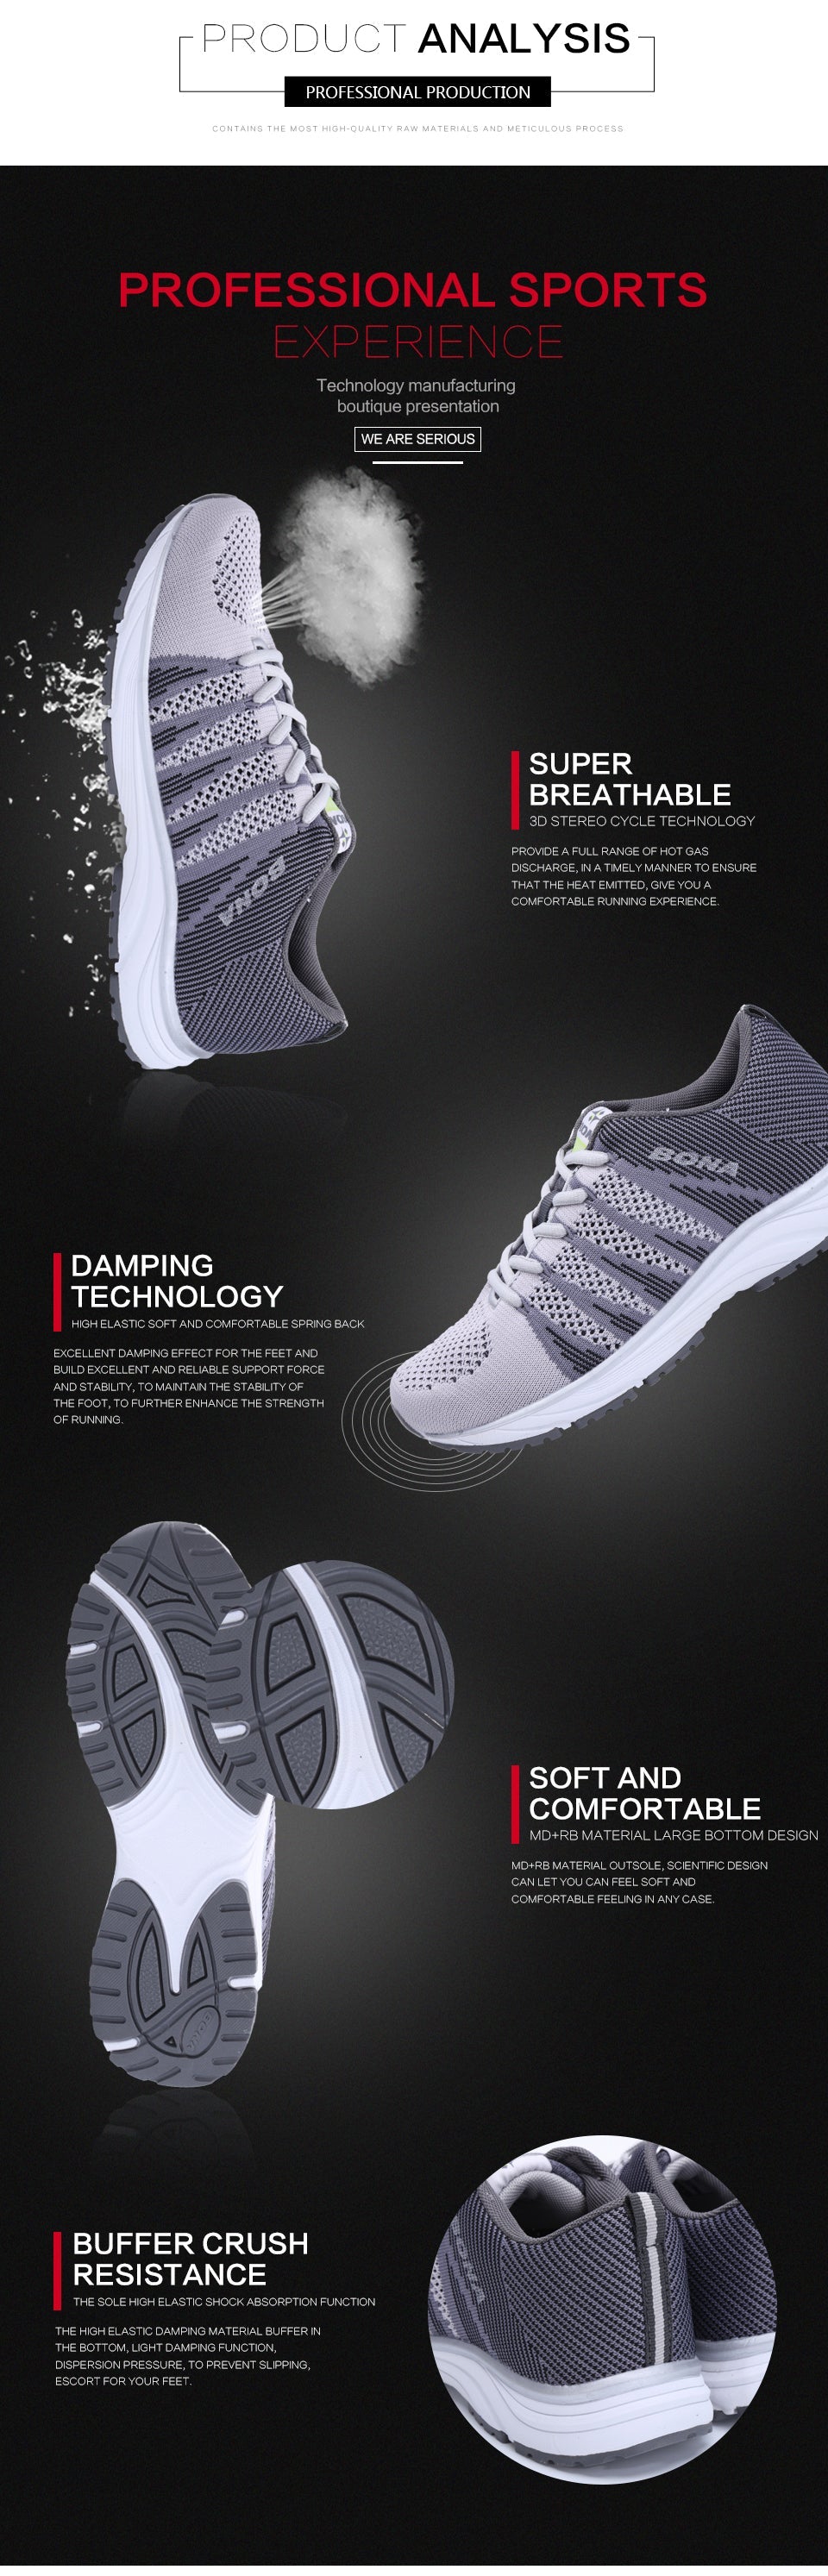 Breathable Running Tennis Outdoor Walking Jogging Sneakers Lace Up Mesh Athletic Shoes Sneakers The Clothing Company Sydney